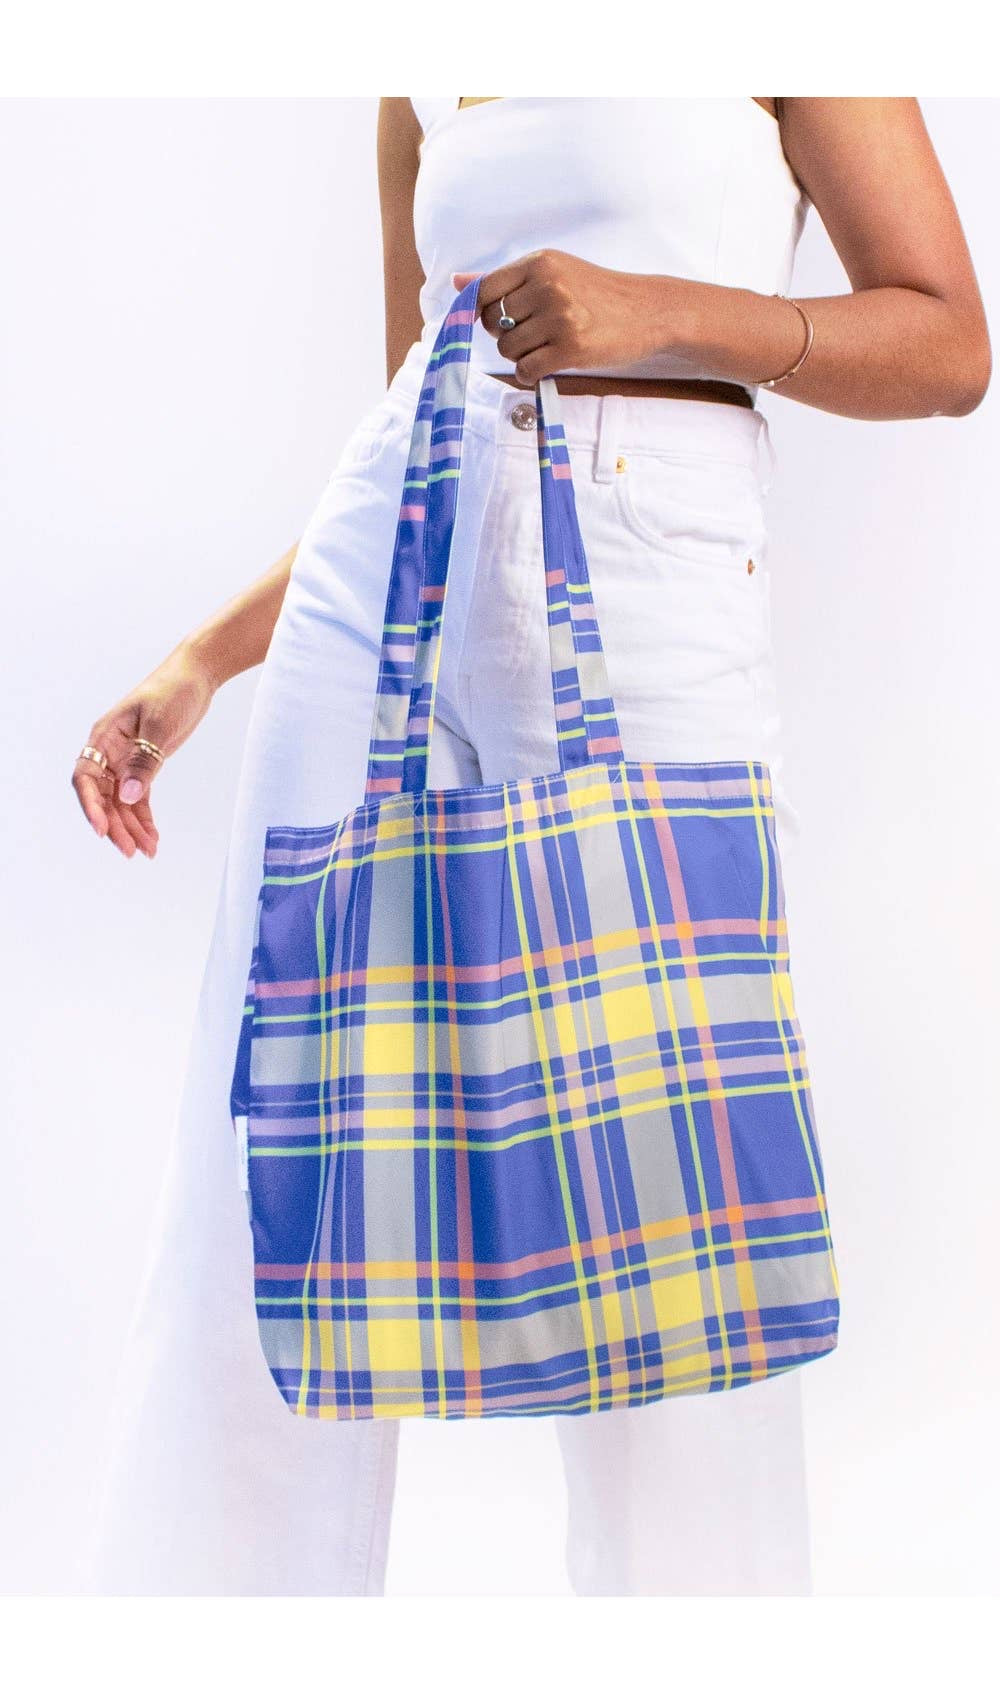 Blue and yellow madras tote bag for women